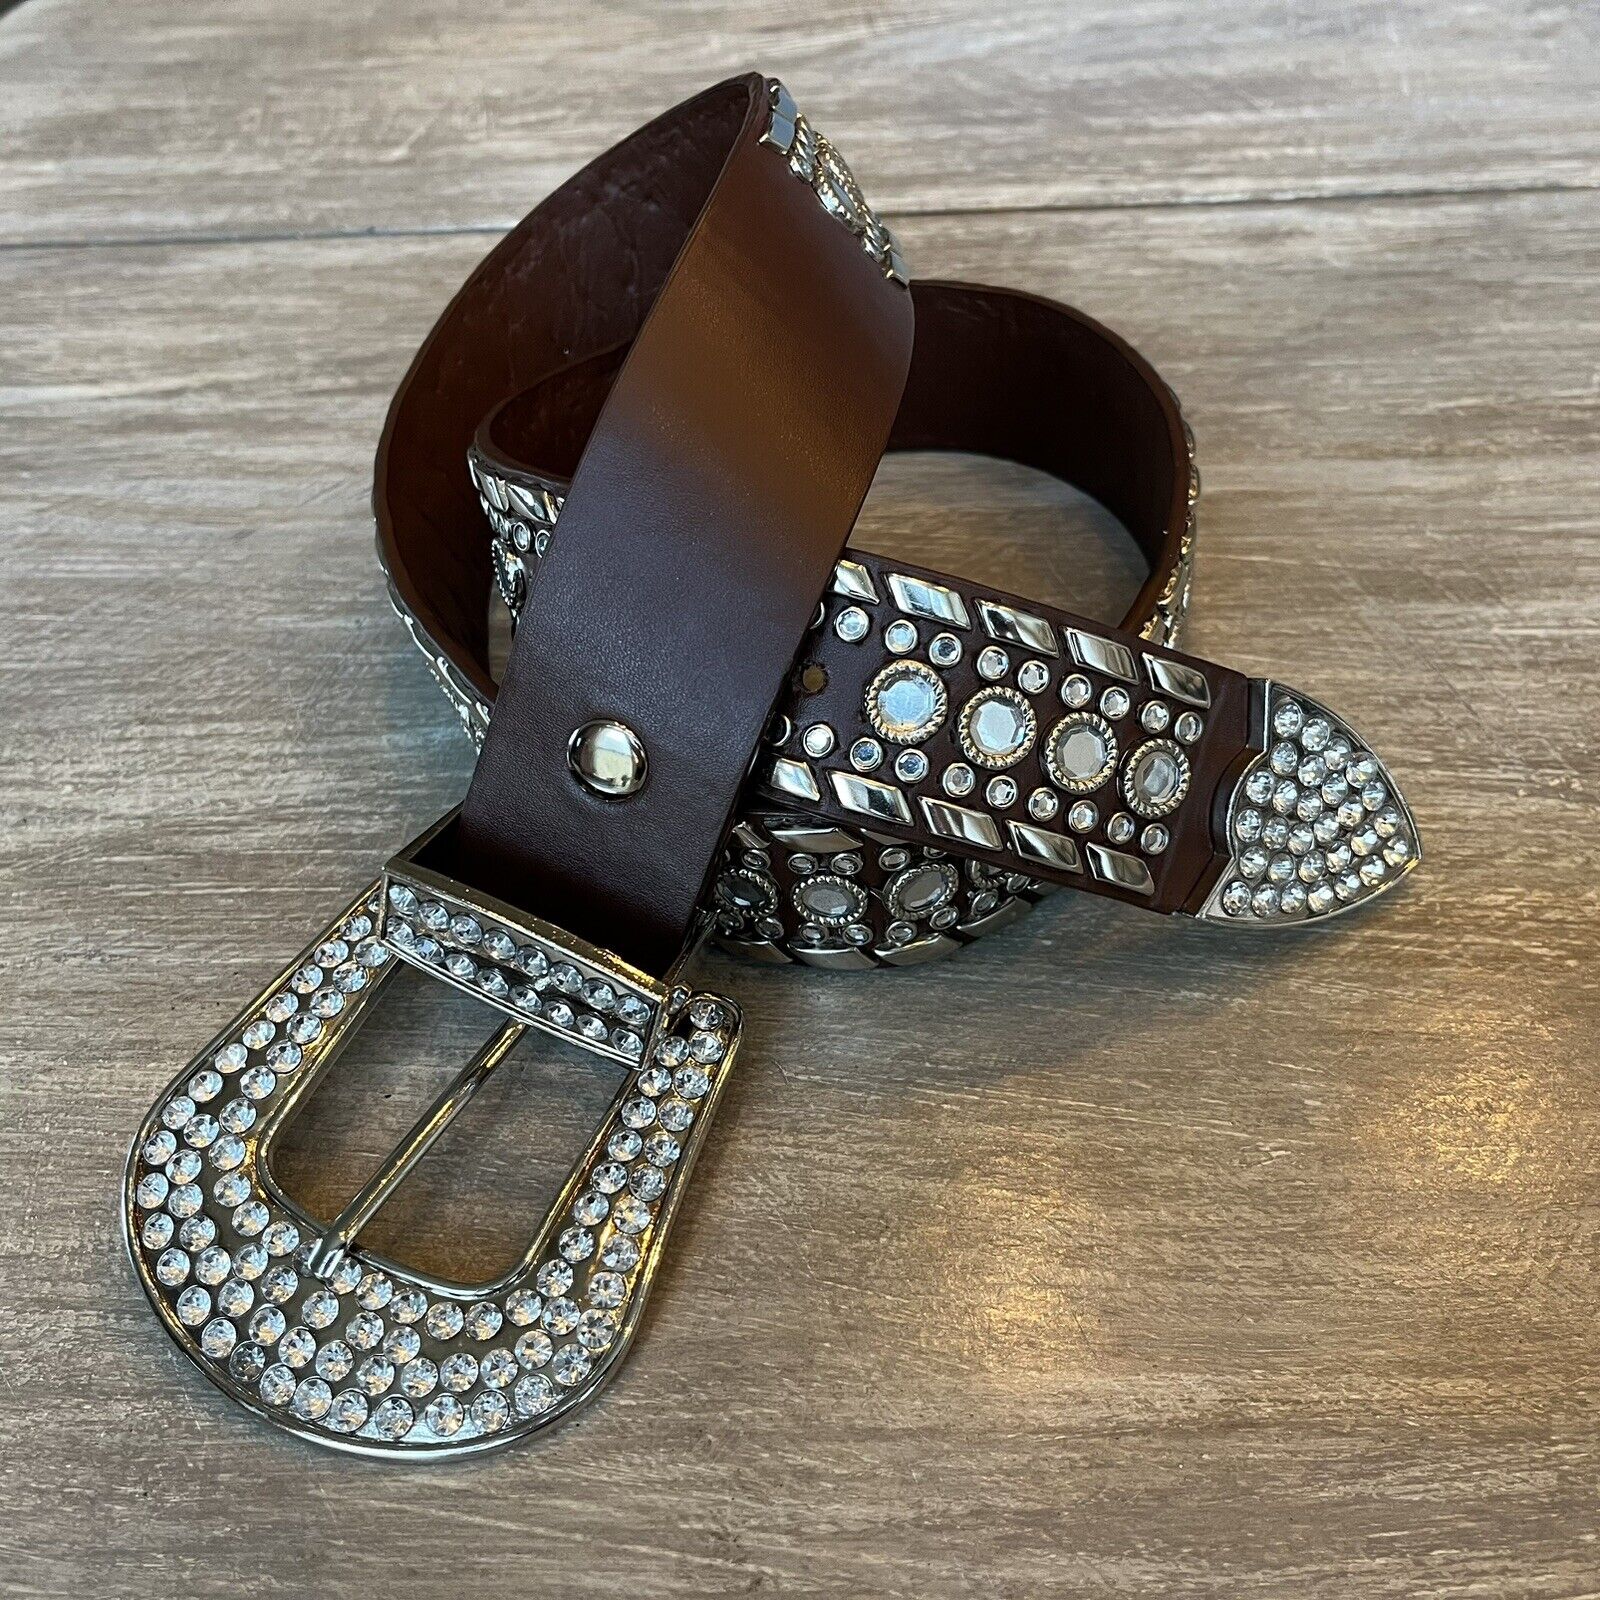 Rhinestone Studded Cowgirl Belt Brown Leather Western Bling S Removable Buckle